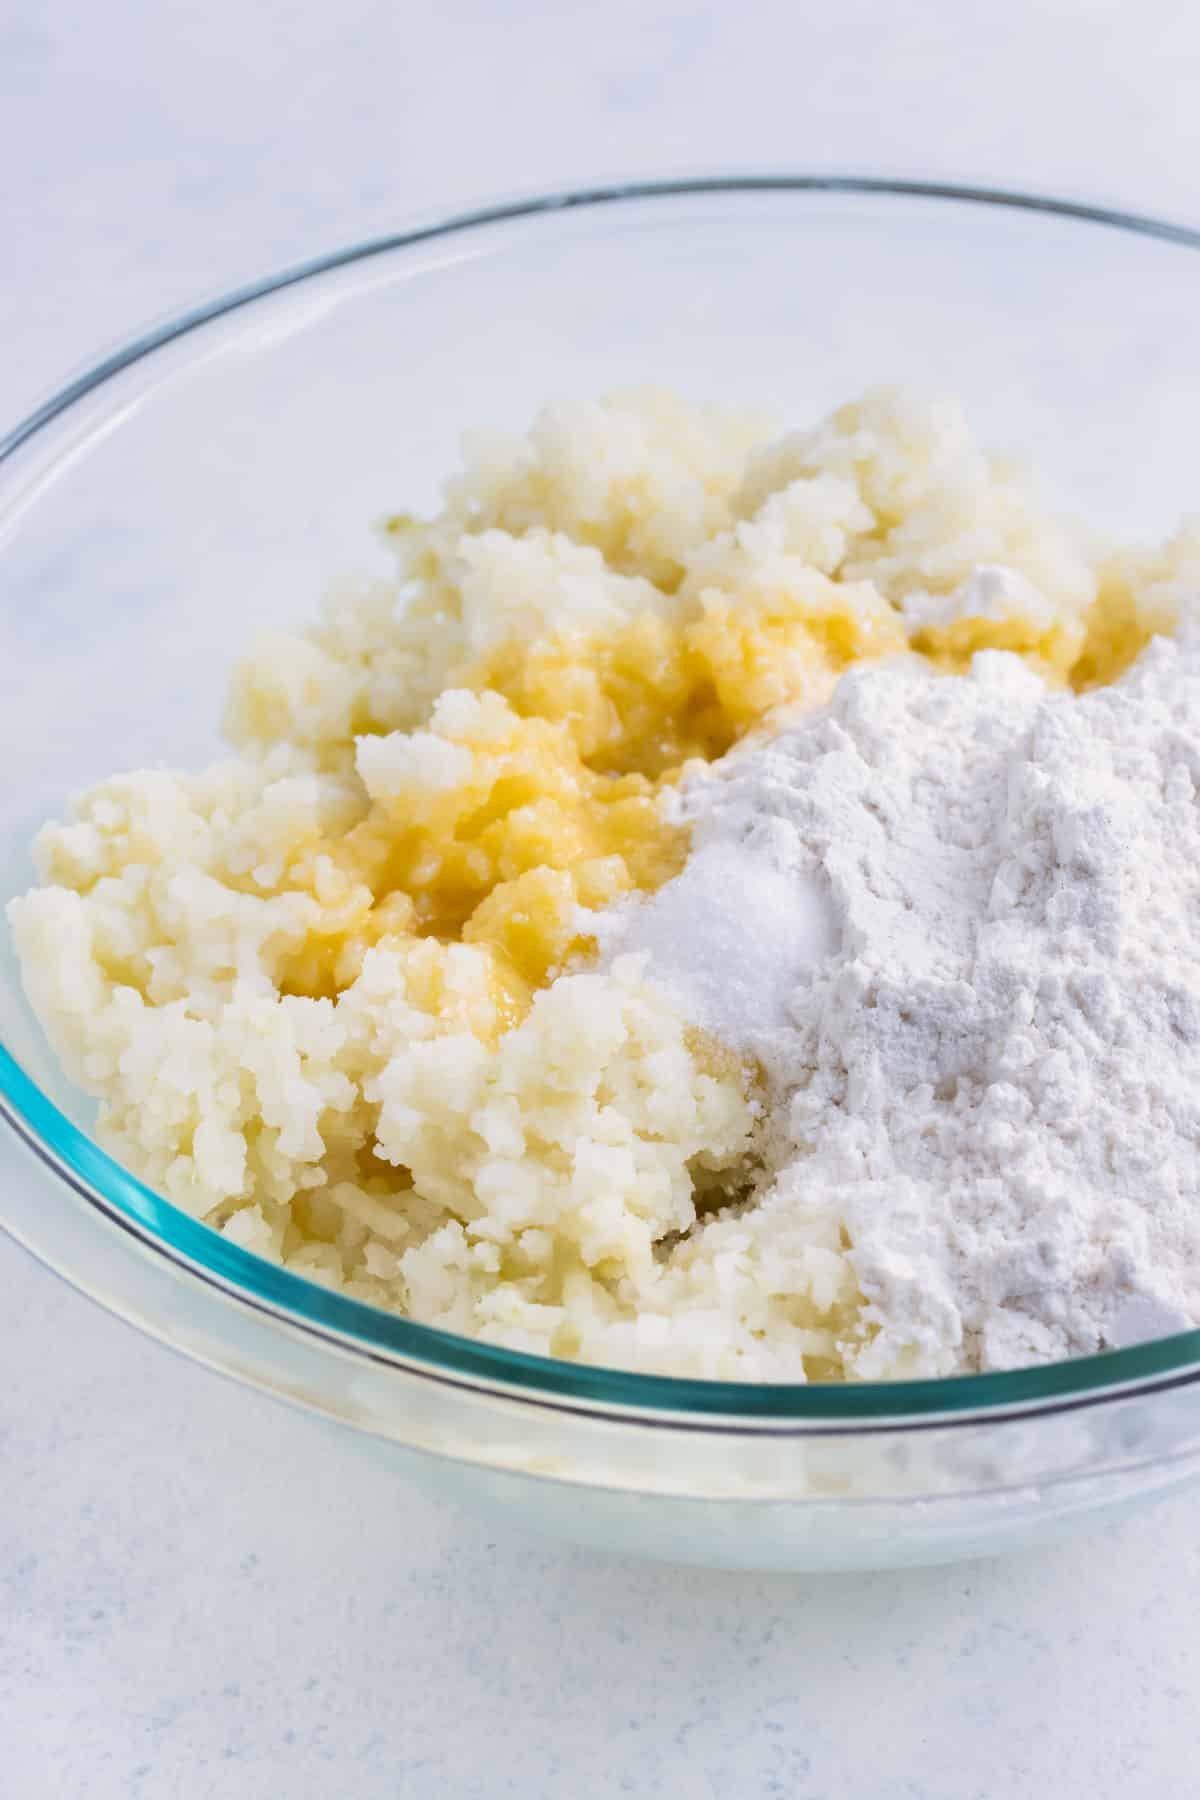 Flour and butter are added to mashed potatoes.